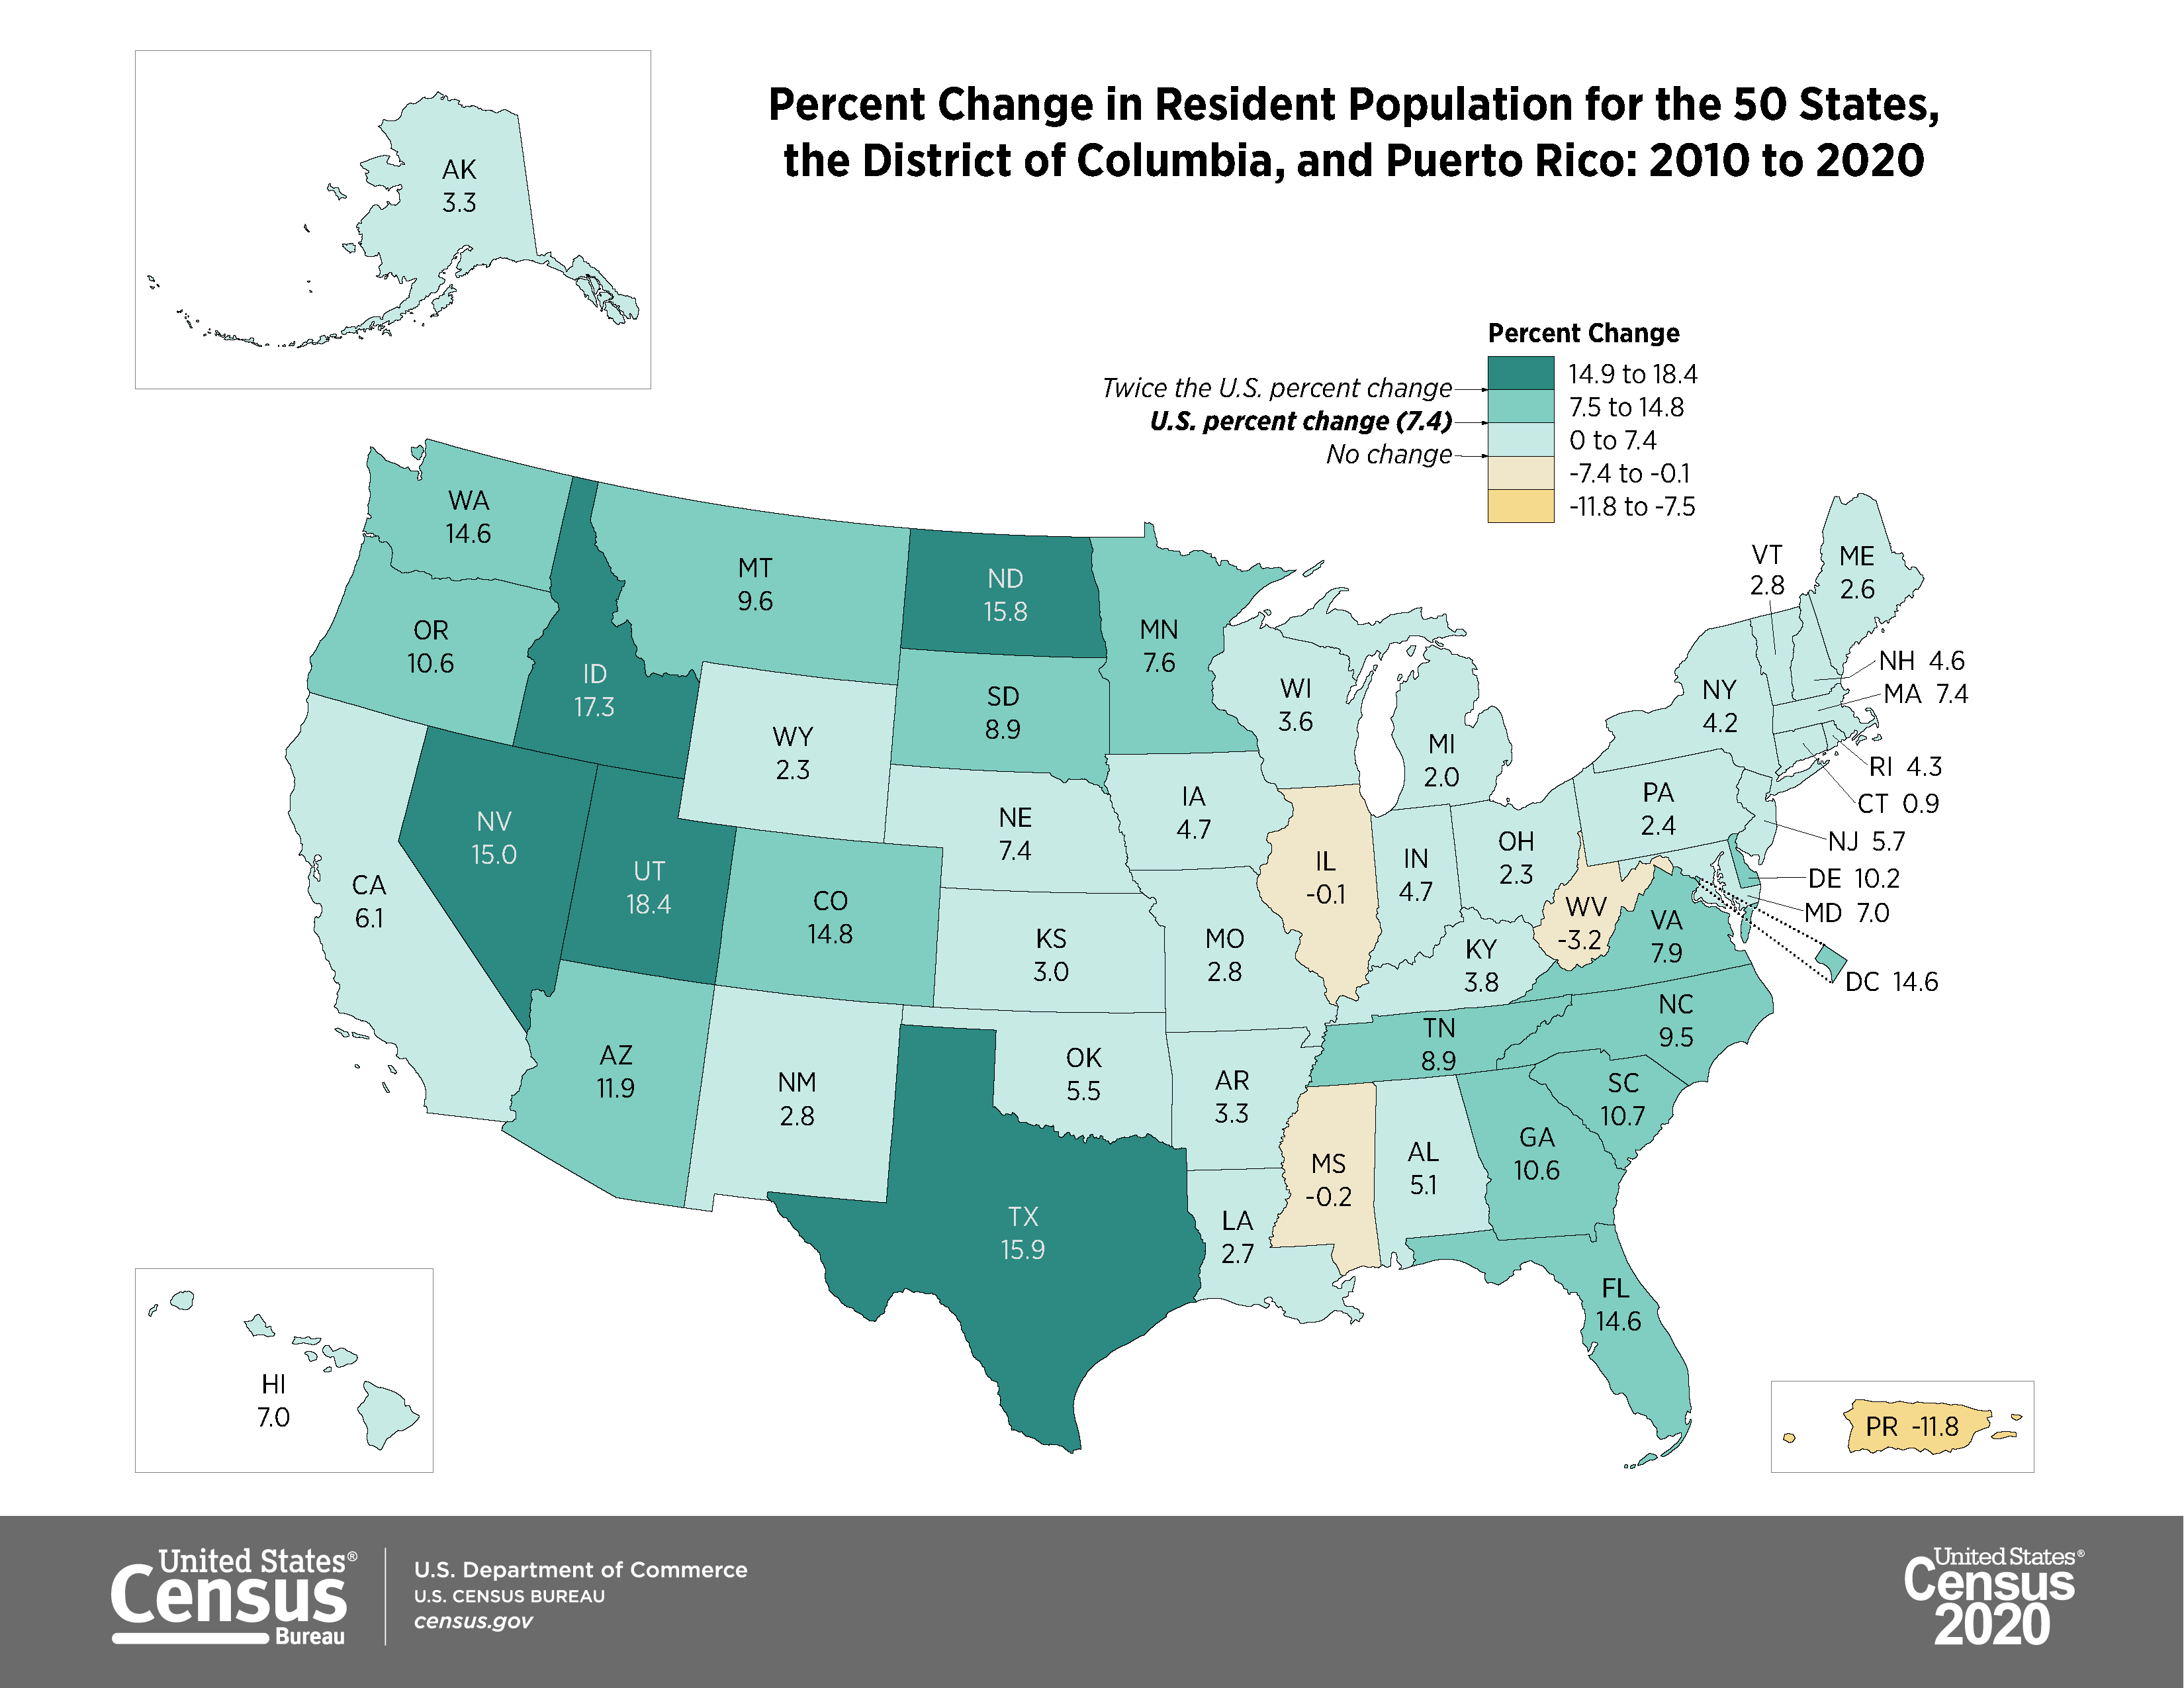 A map showing the percent change in resident population for the 50 states, District of Columbia, and Puerto Rico from 2010 to 2020